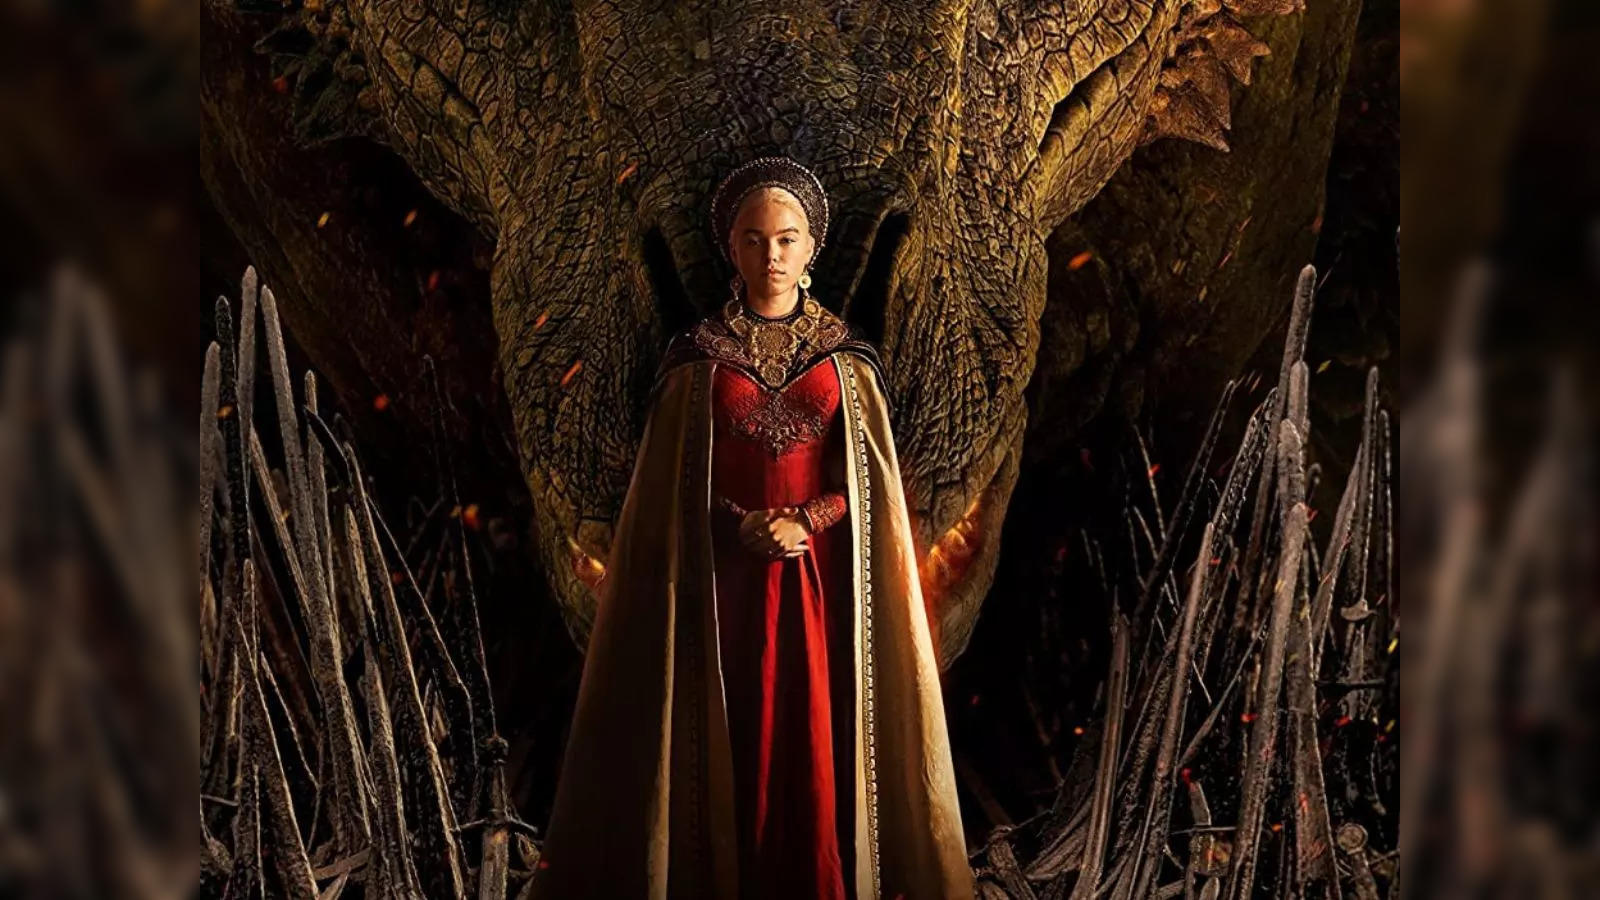 House of the Dragon' Breaks Ratings Record for HBO